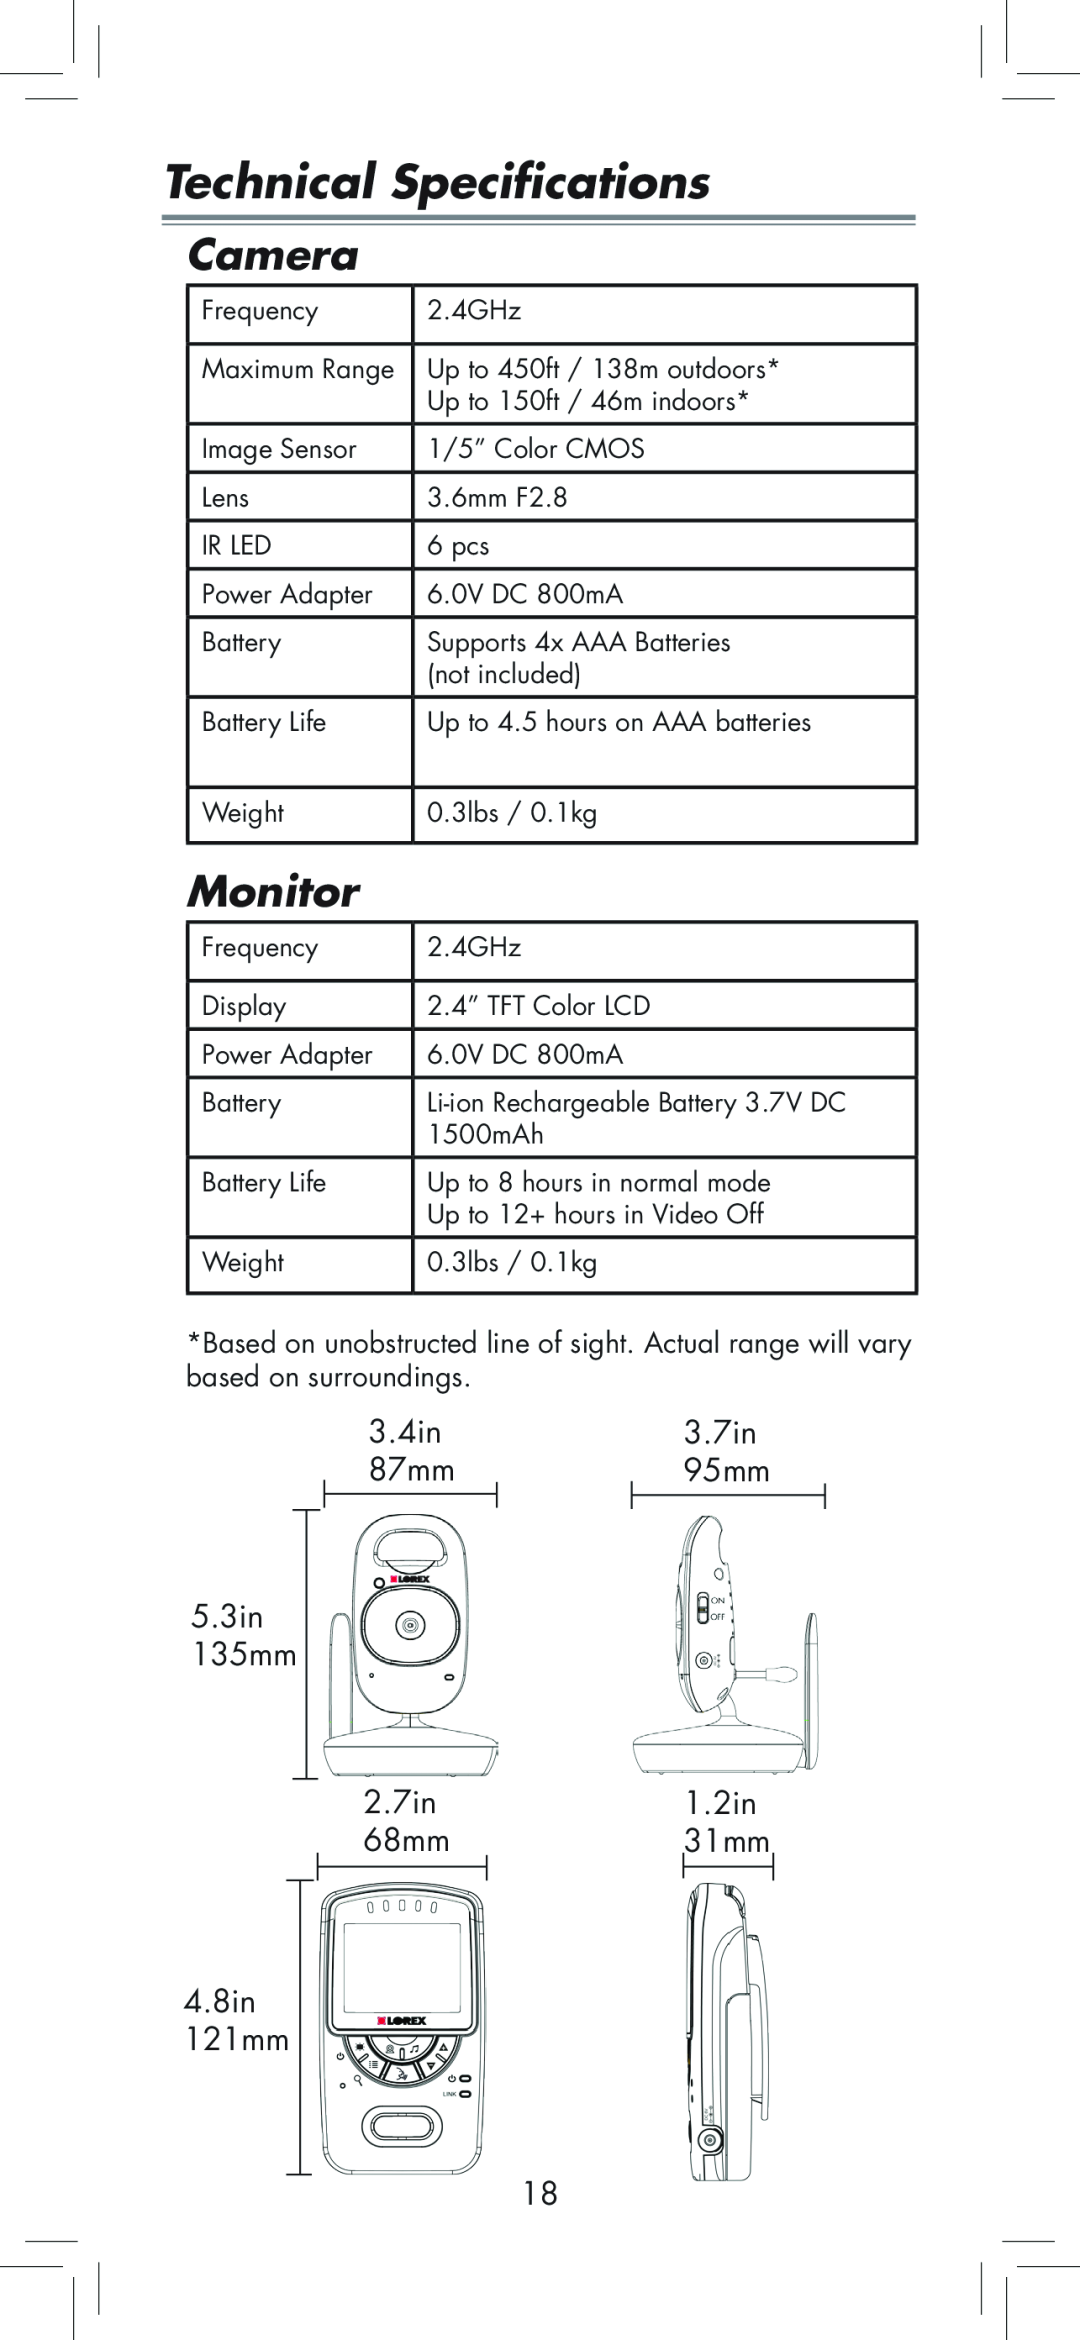 LOREX Technology BB2411 Technical Specifications, Camera, Monitor, 3.4in, 3.7in, 87mm, 95mm, 5.3in 135mm, 2.7in, 1.2in 